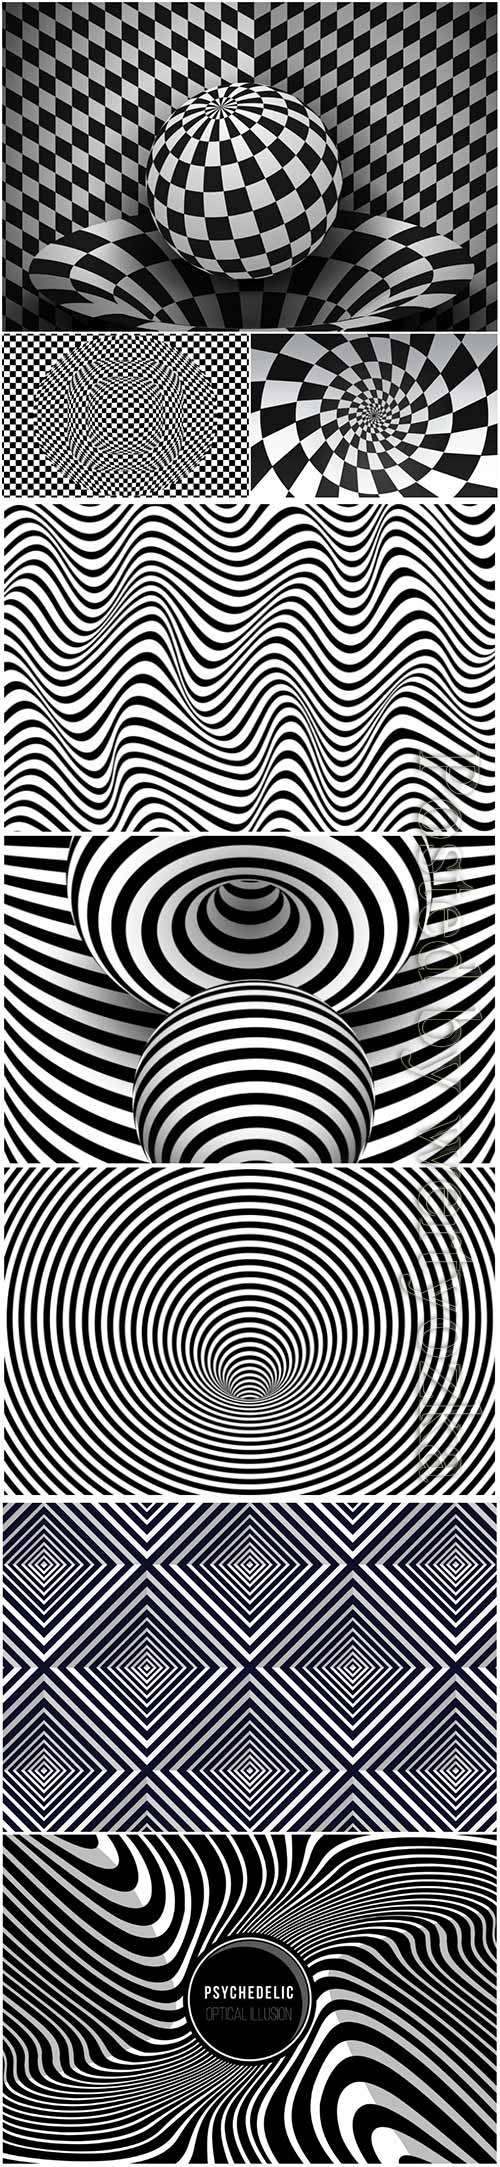 Psychedelic optical illusion vector background # 2